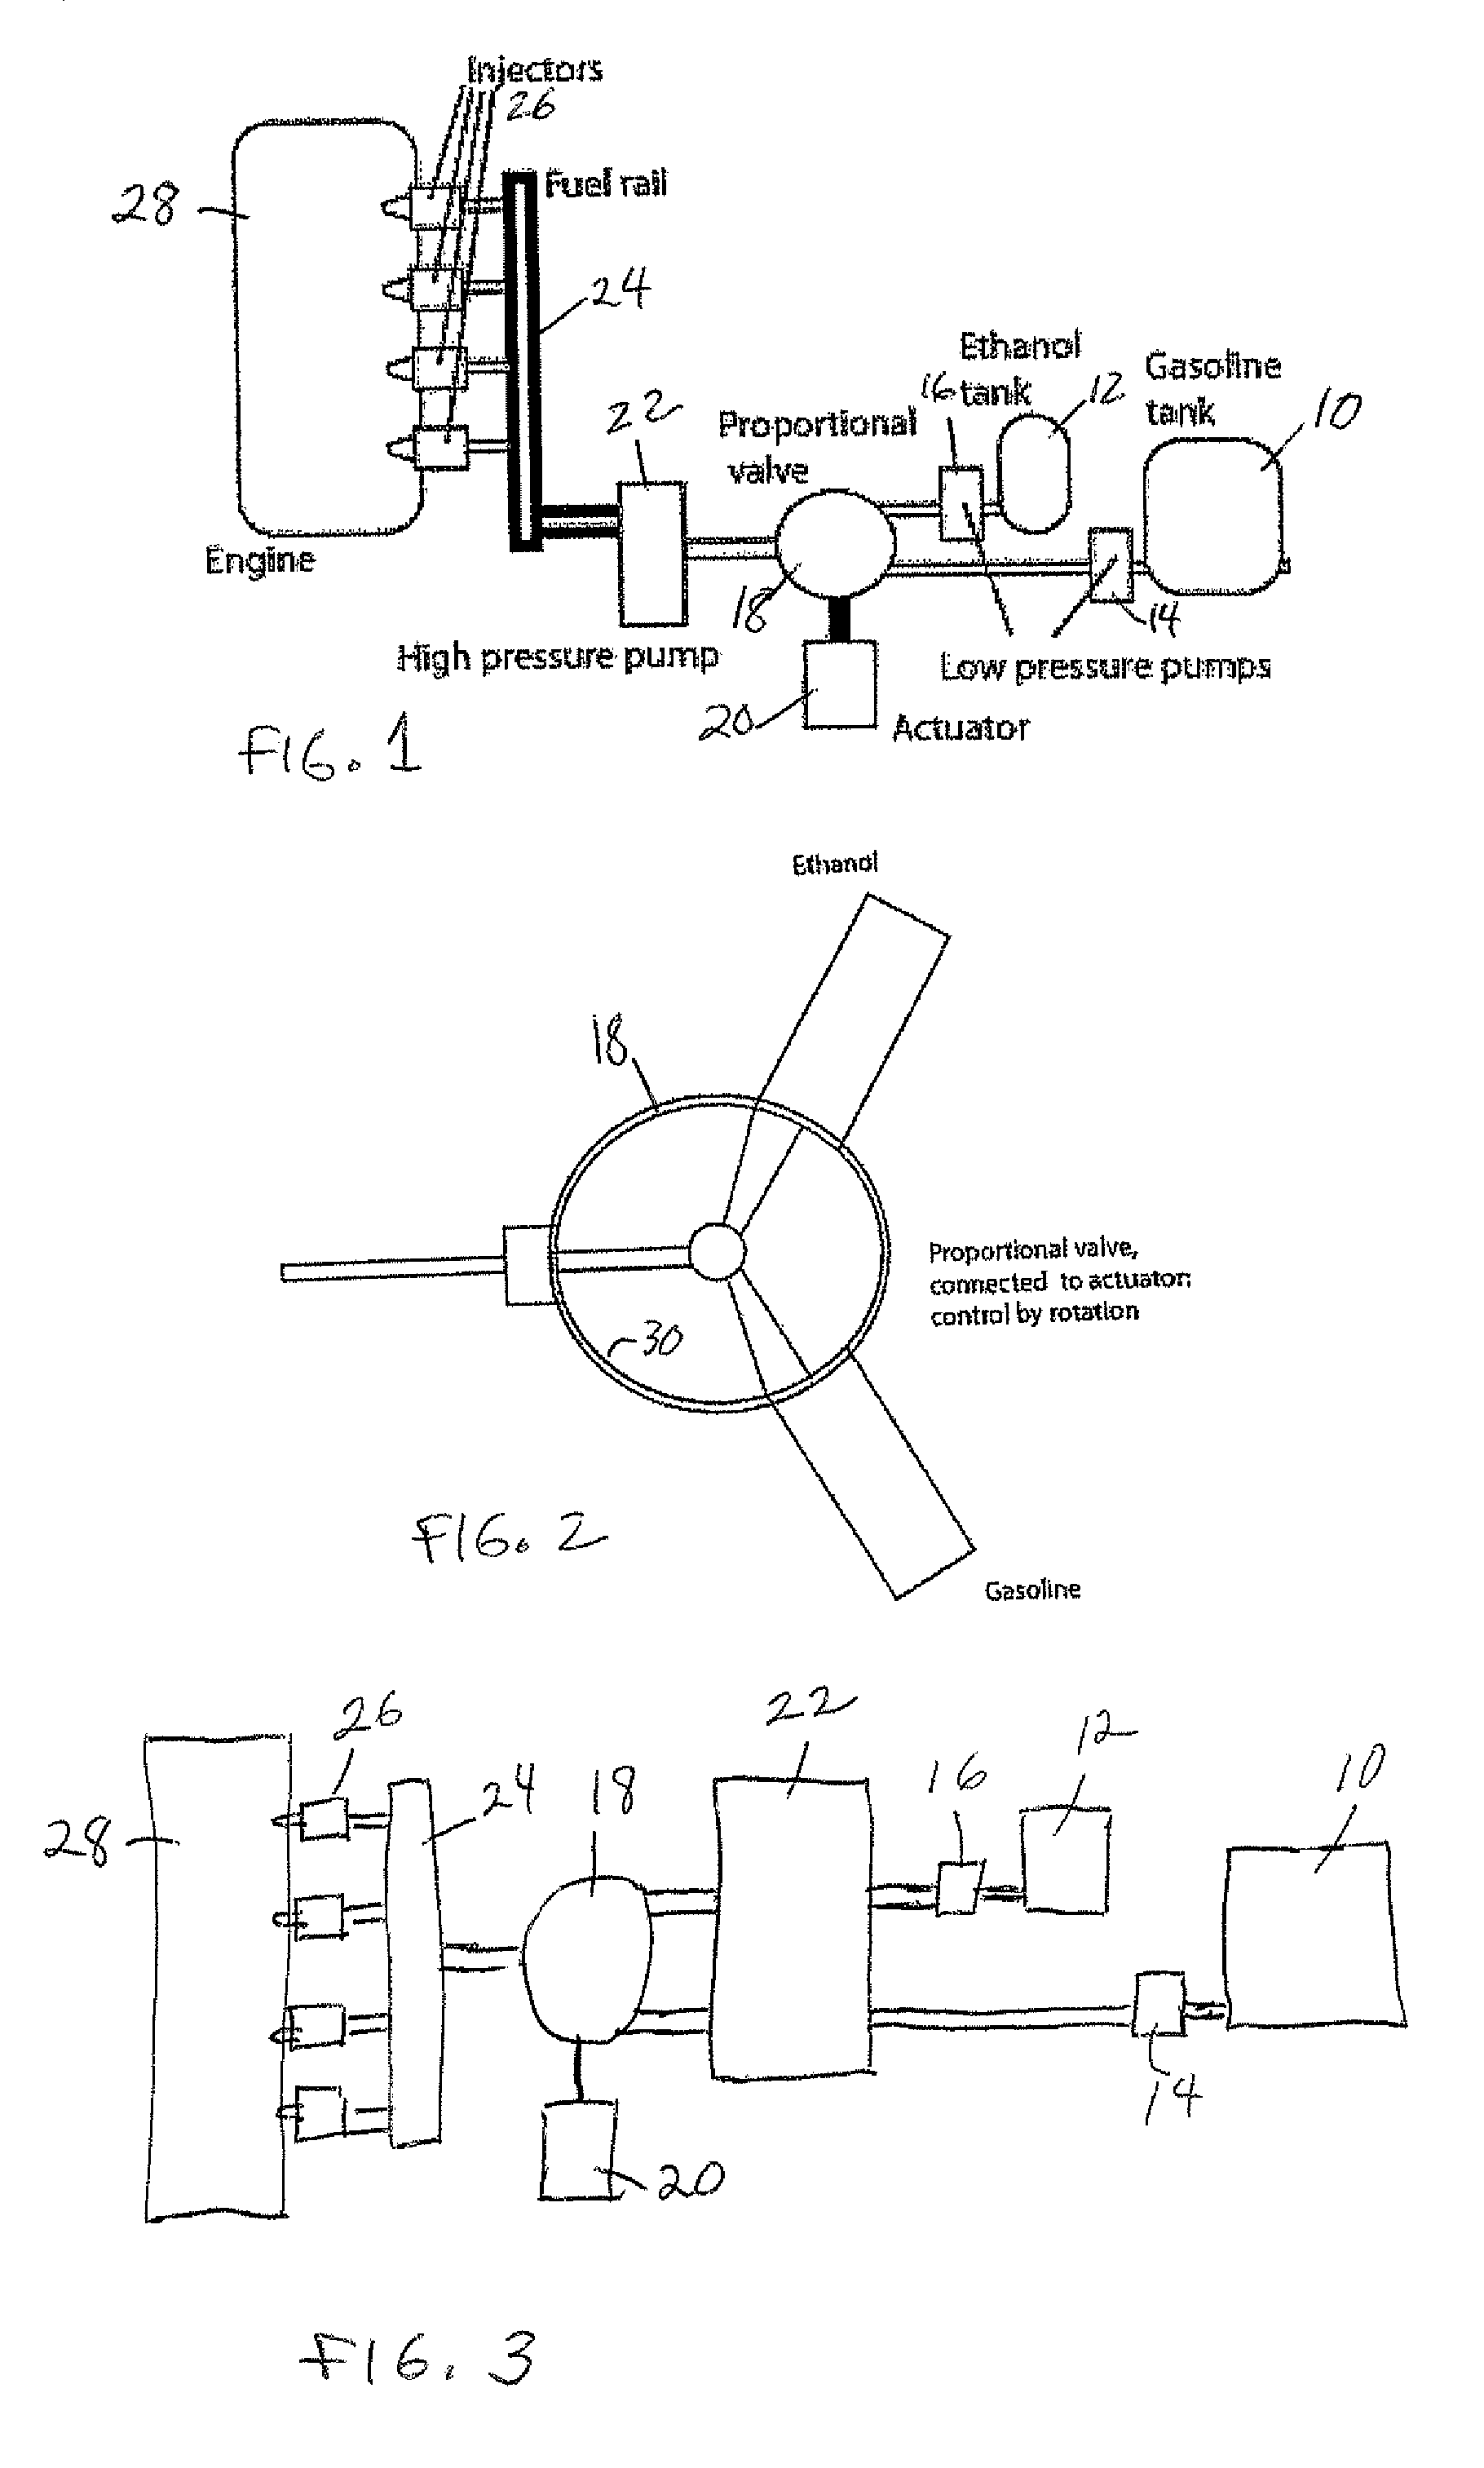 Single nozzle direct injection system for rapidly variable gasoline/anti-knock agents mixtures